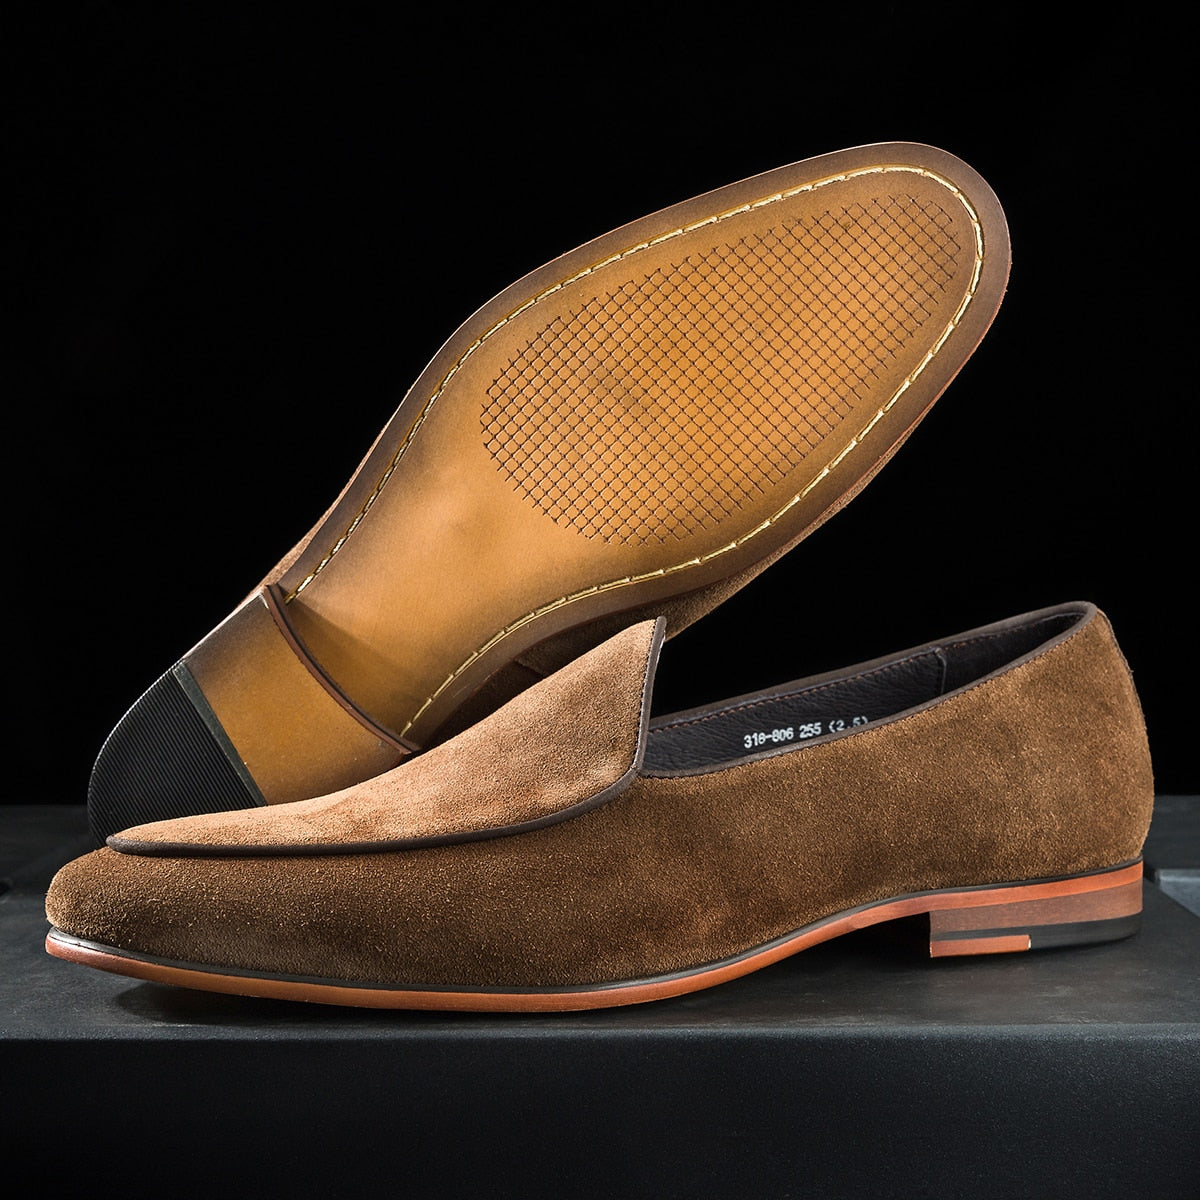 Hans England Loafers Shoe